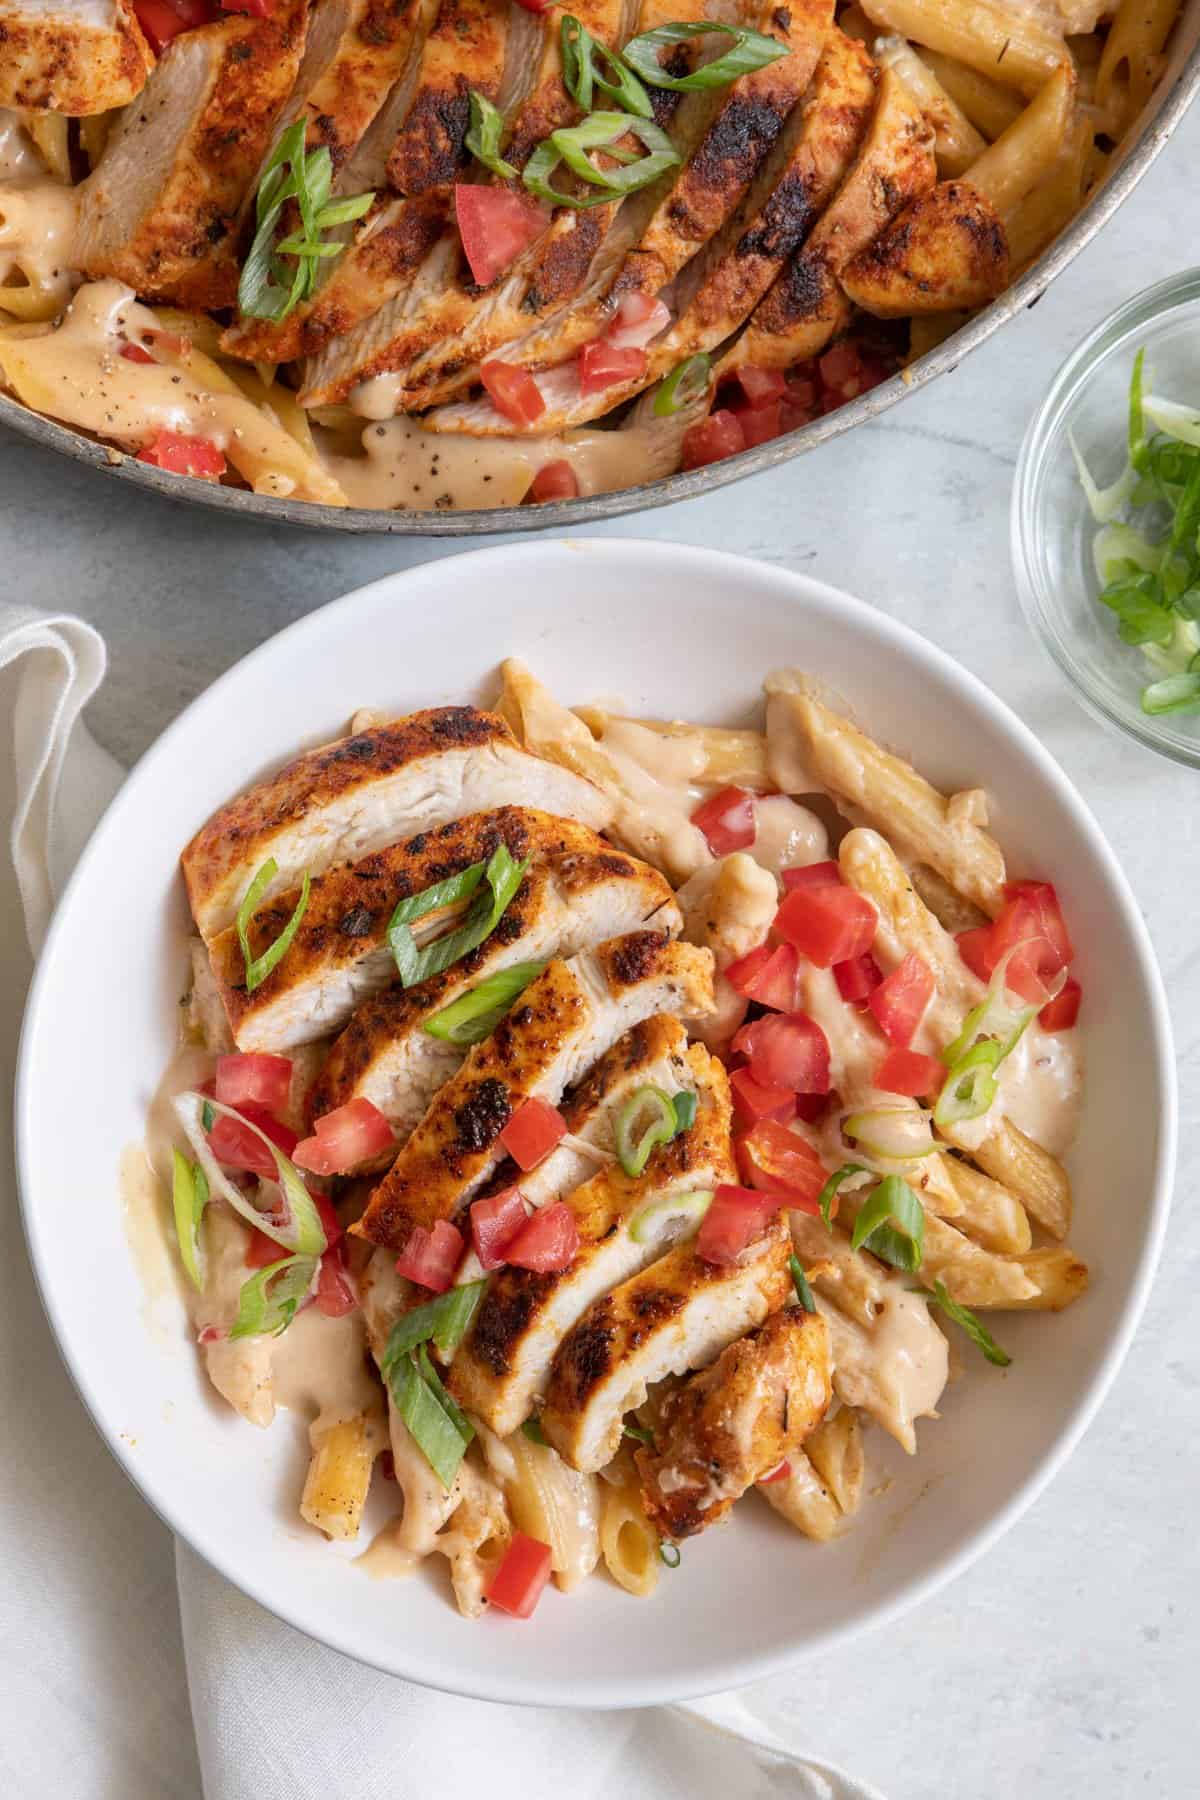 Bowl of creamy cajun pasta topped with sliced chicken breast and garnished with green onions and diced tomatoes and the skillet of recipe to the side.